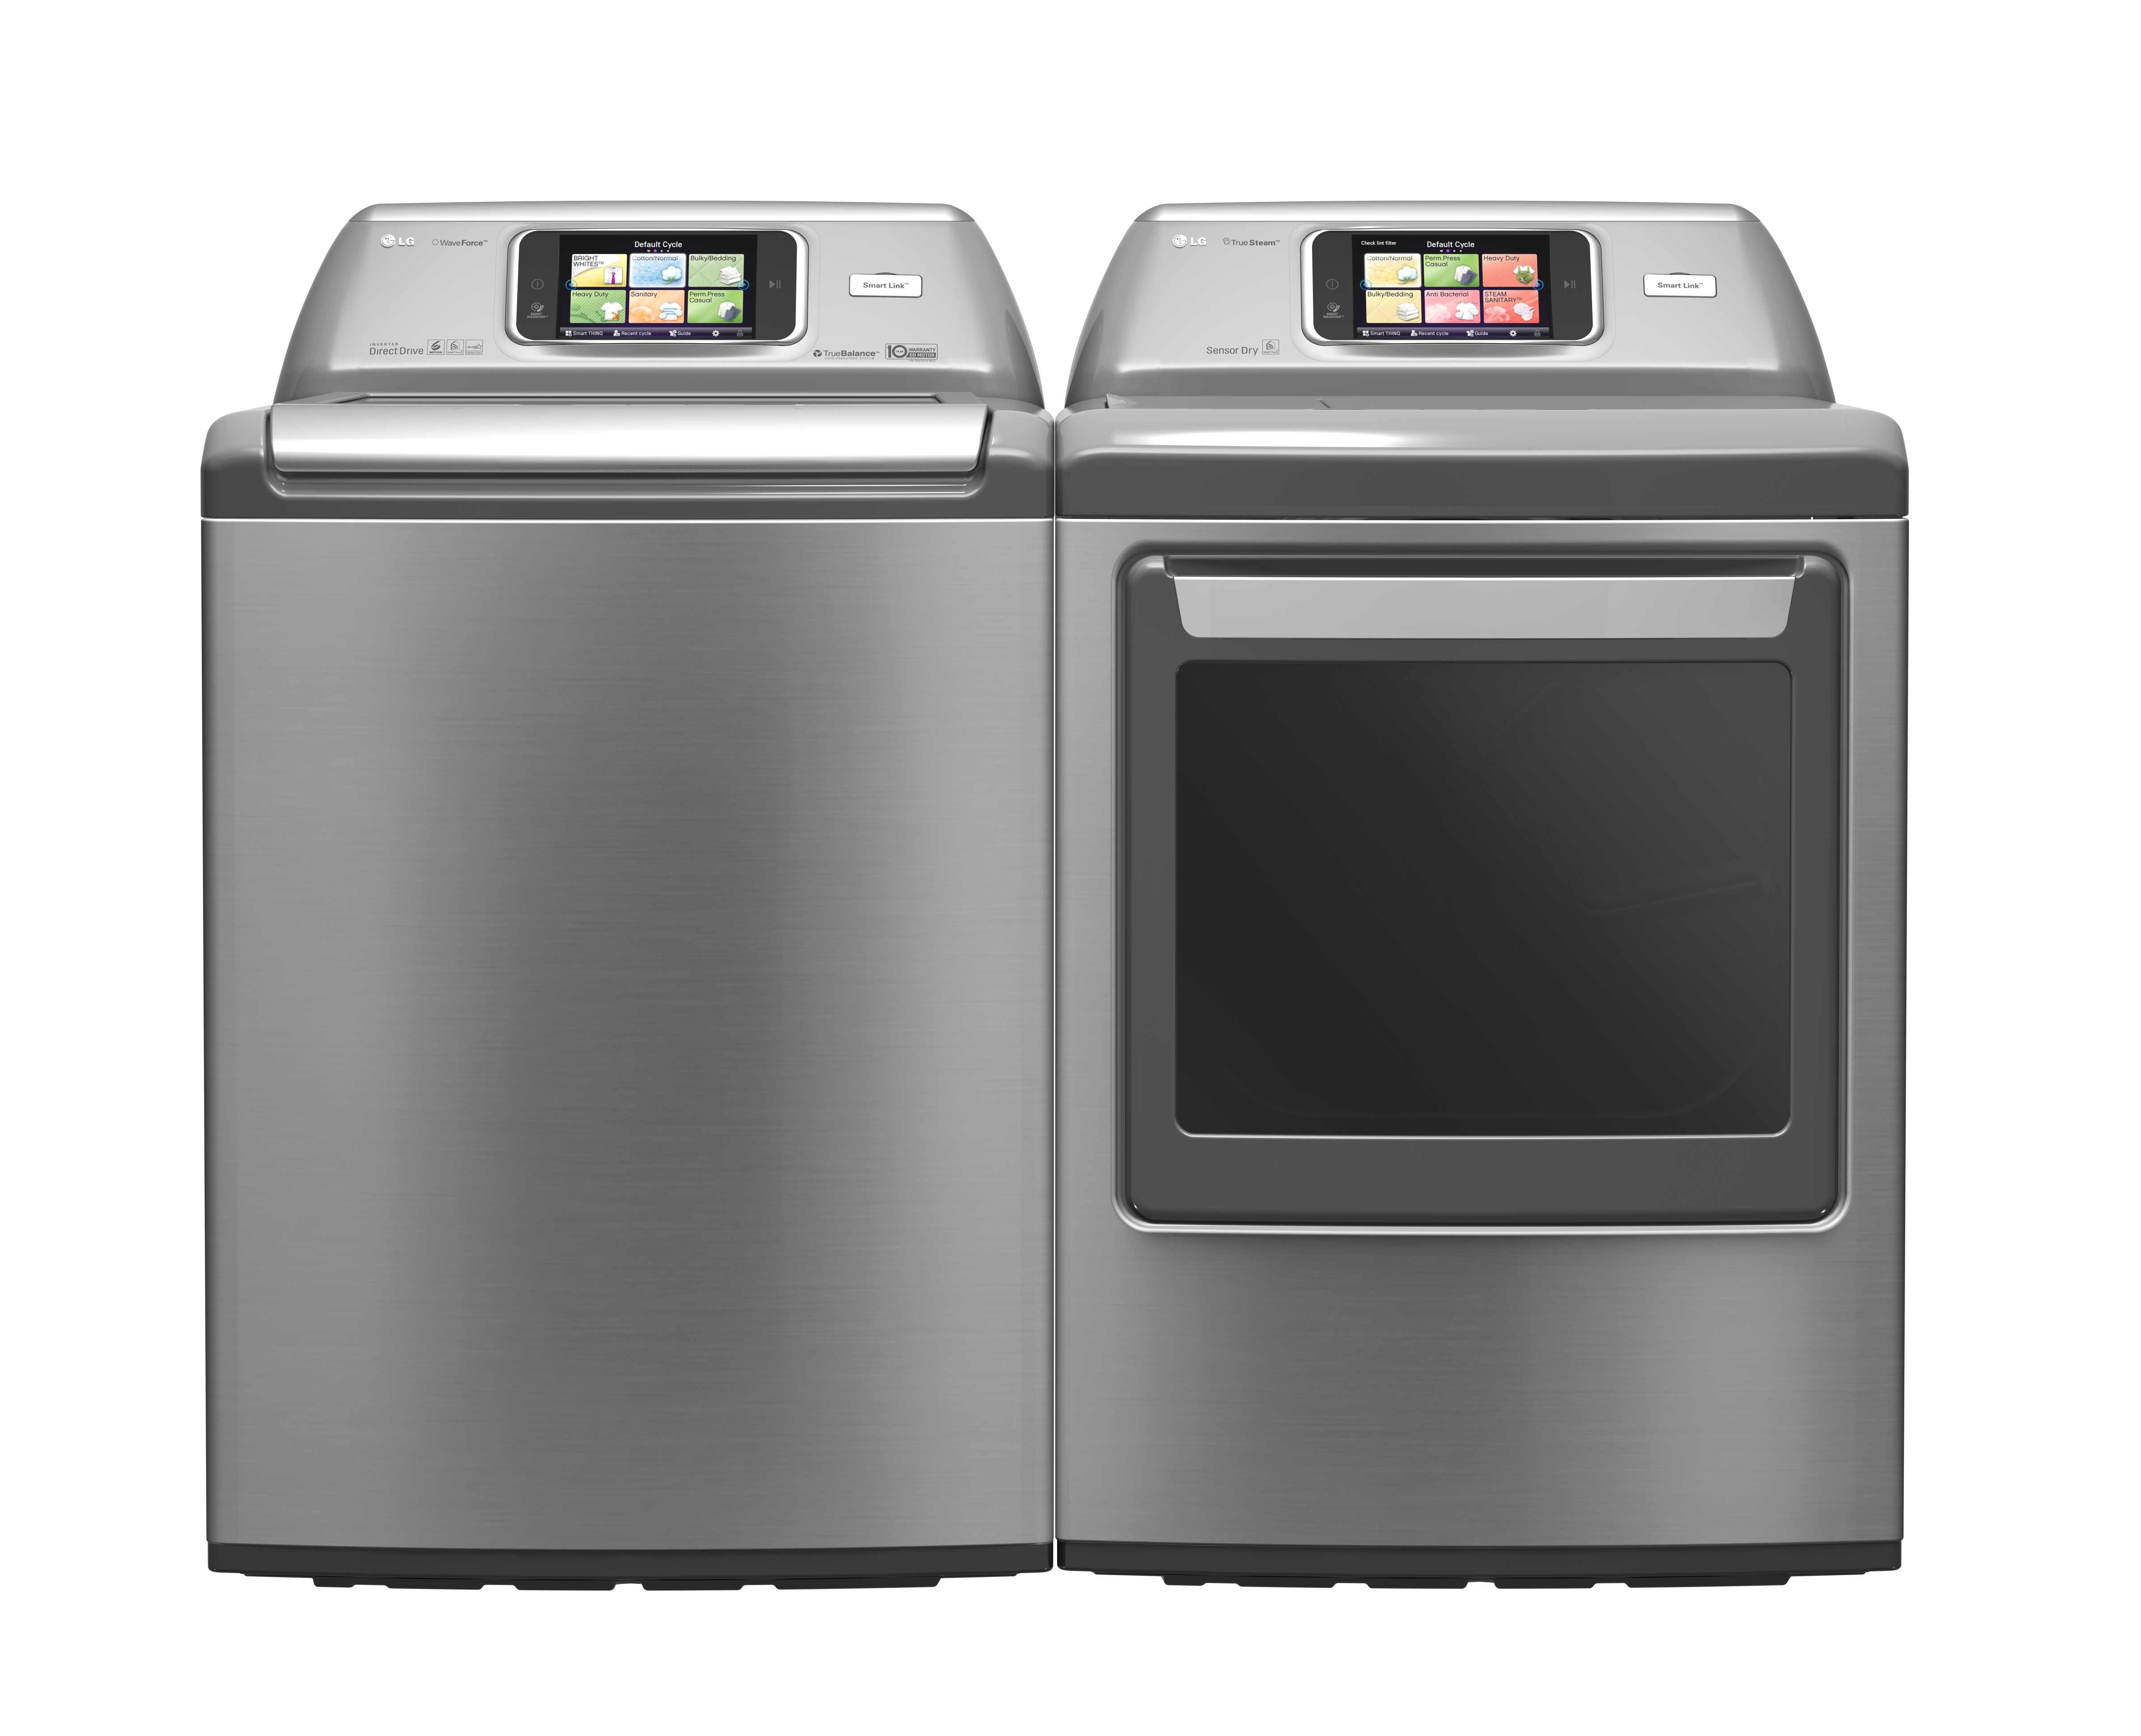 Front view of two LG smart washing machines